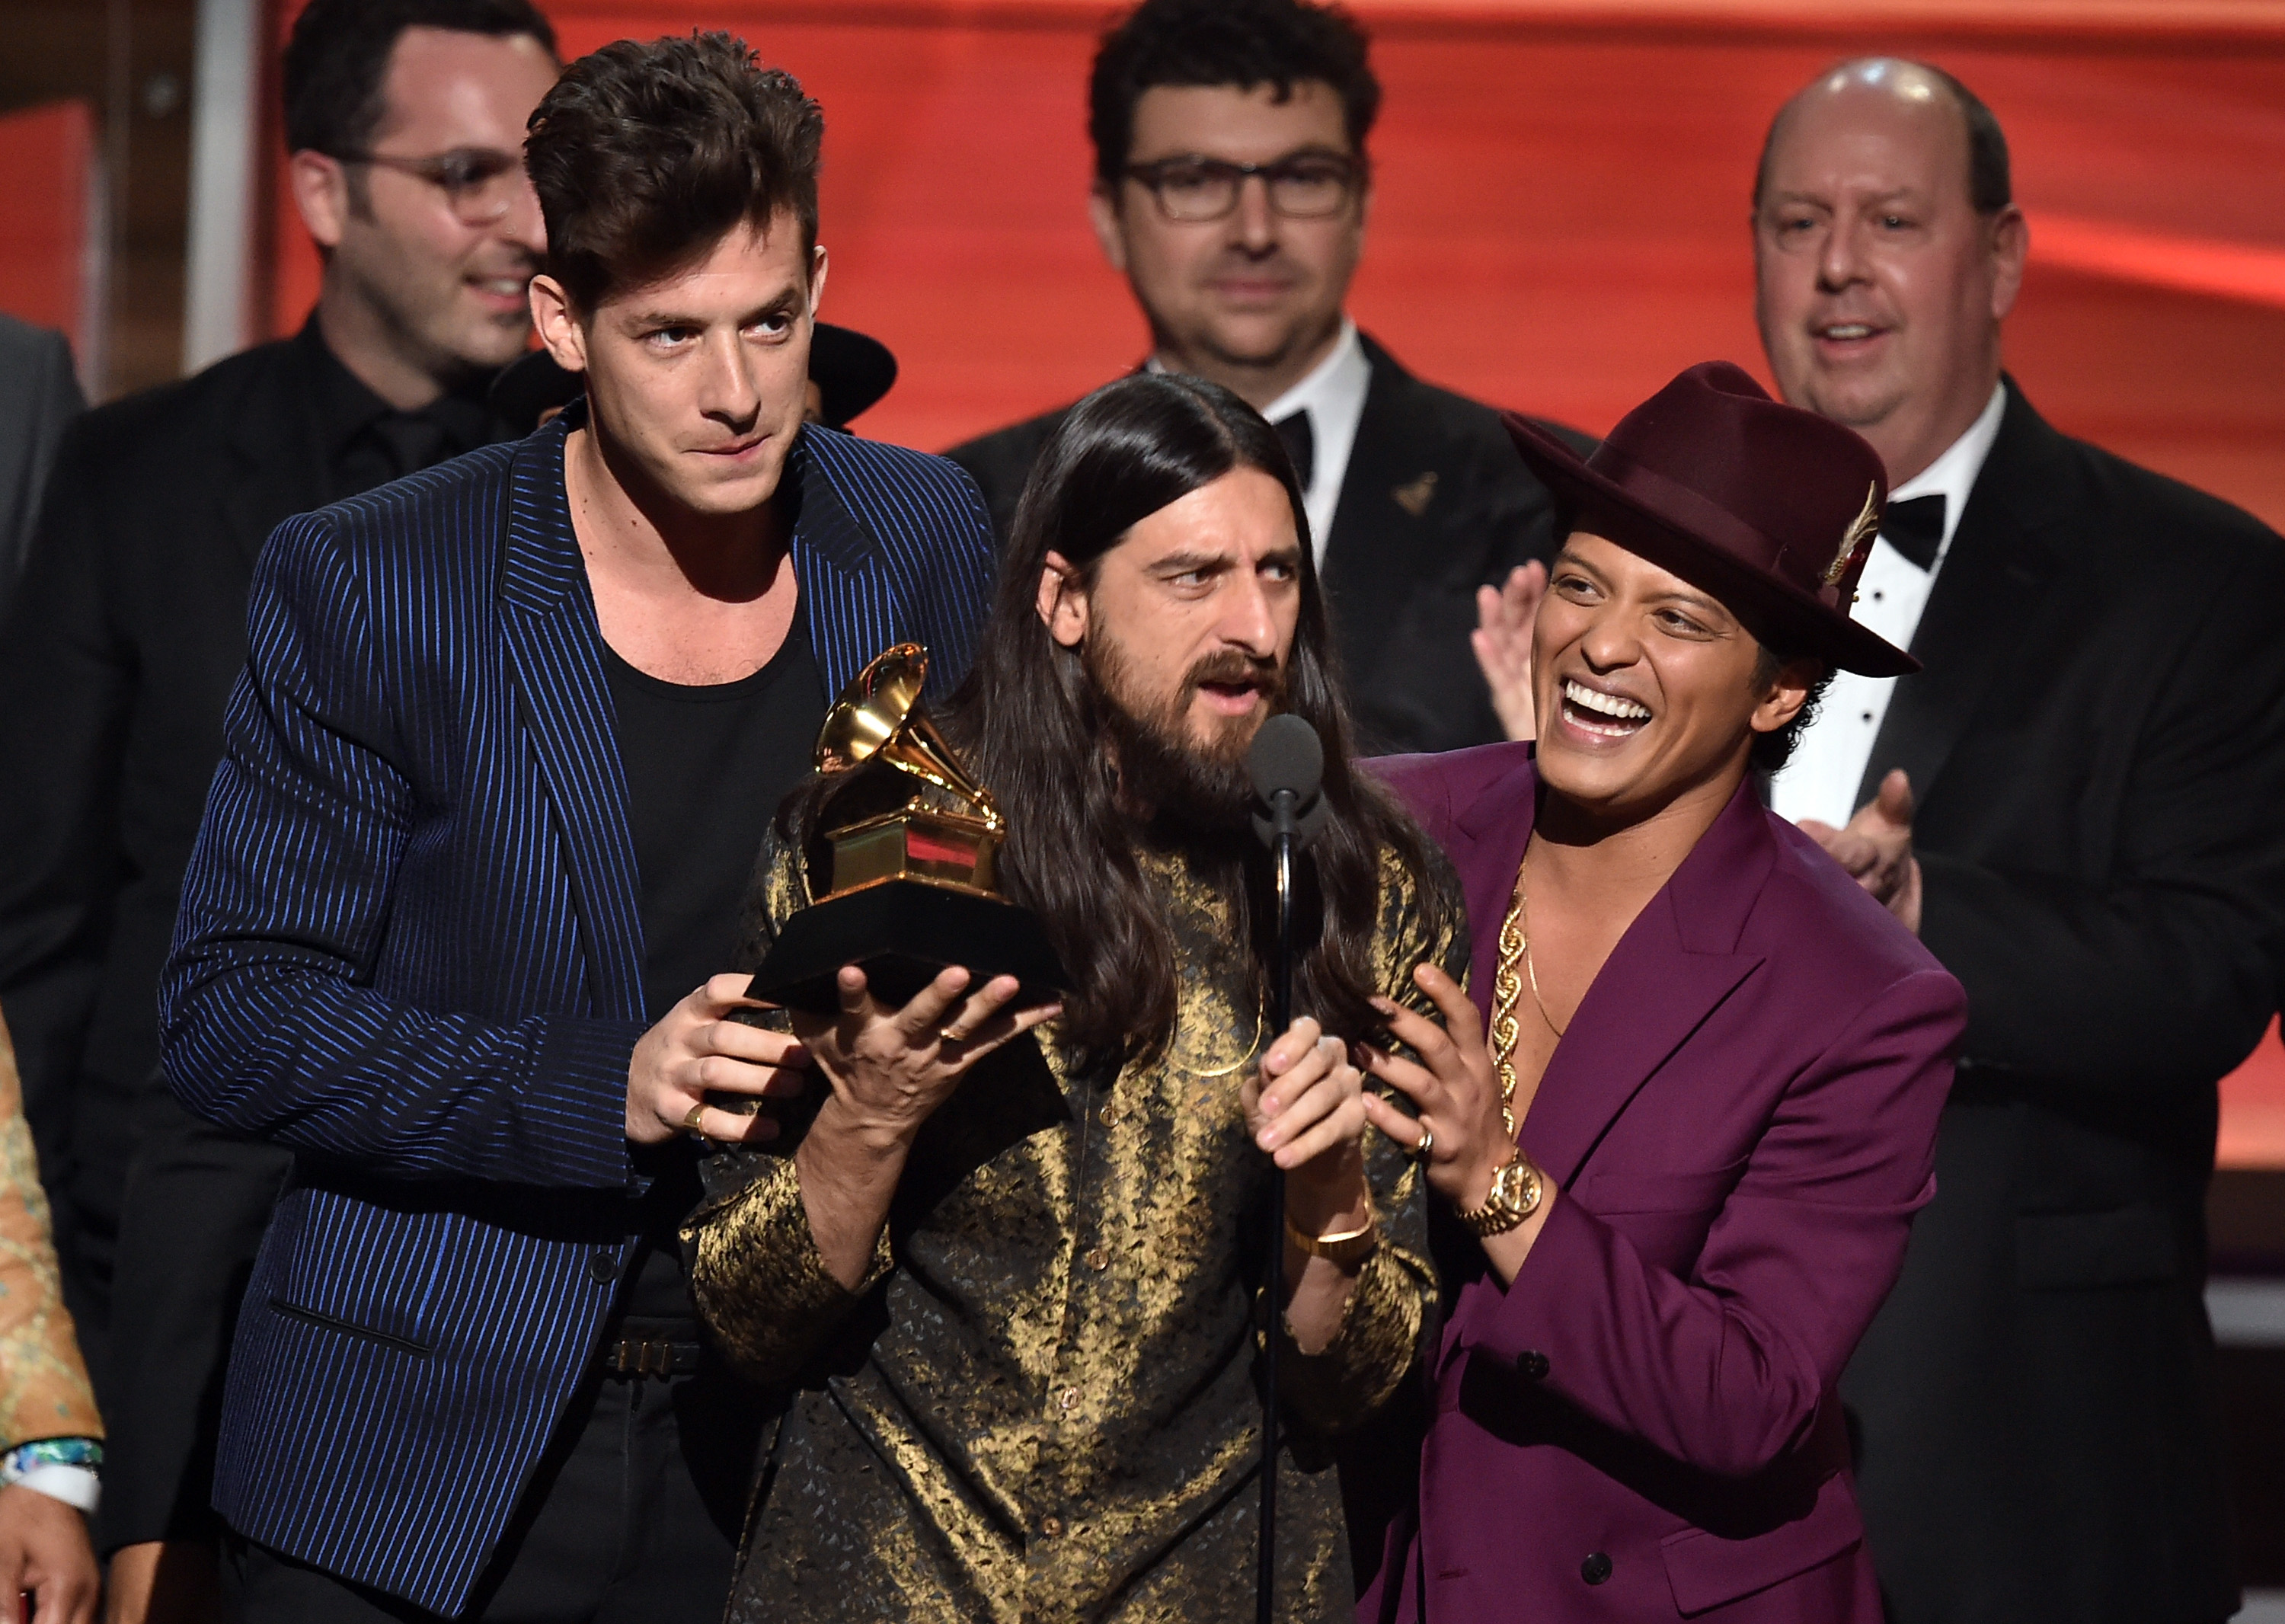 From left: Mark Ronson, Jeff Bhasker, and Bruno Mars accept 